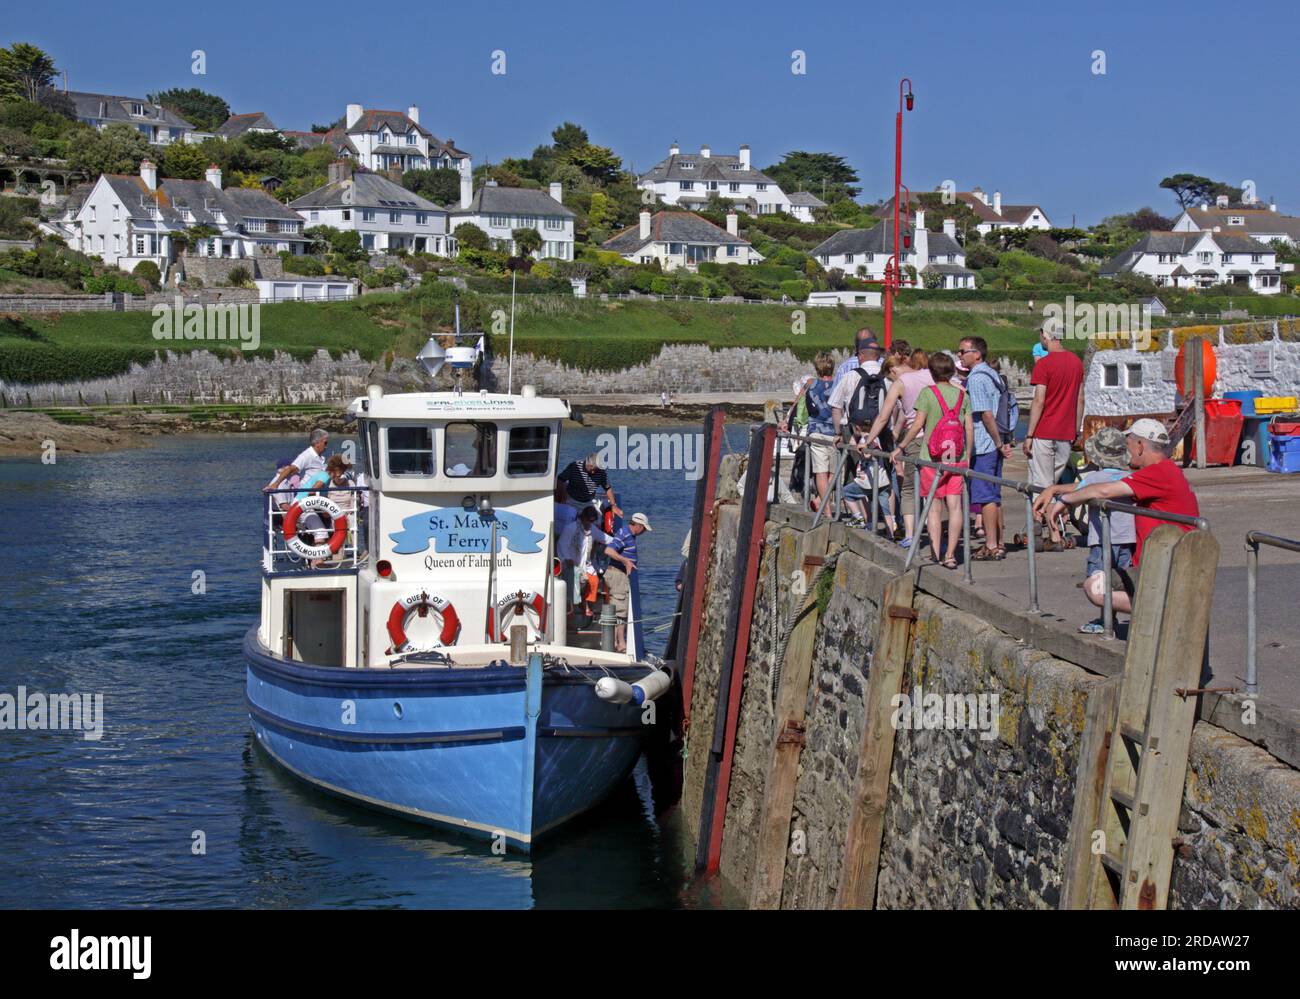 Boarding the St Mawes ferry, Queen of Falmouth,  into the River Fal, Cornwall, South West England, UK, TR2 5DG Stock Photo